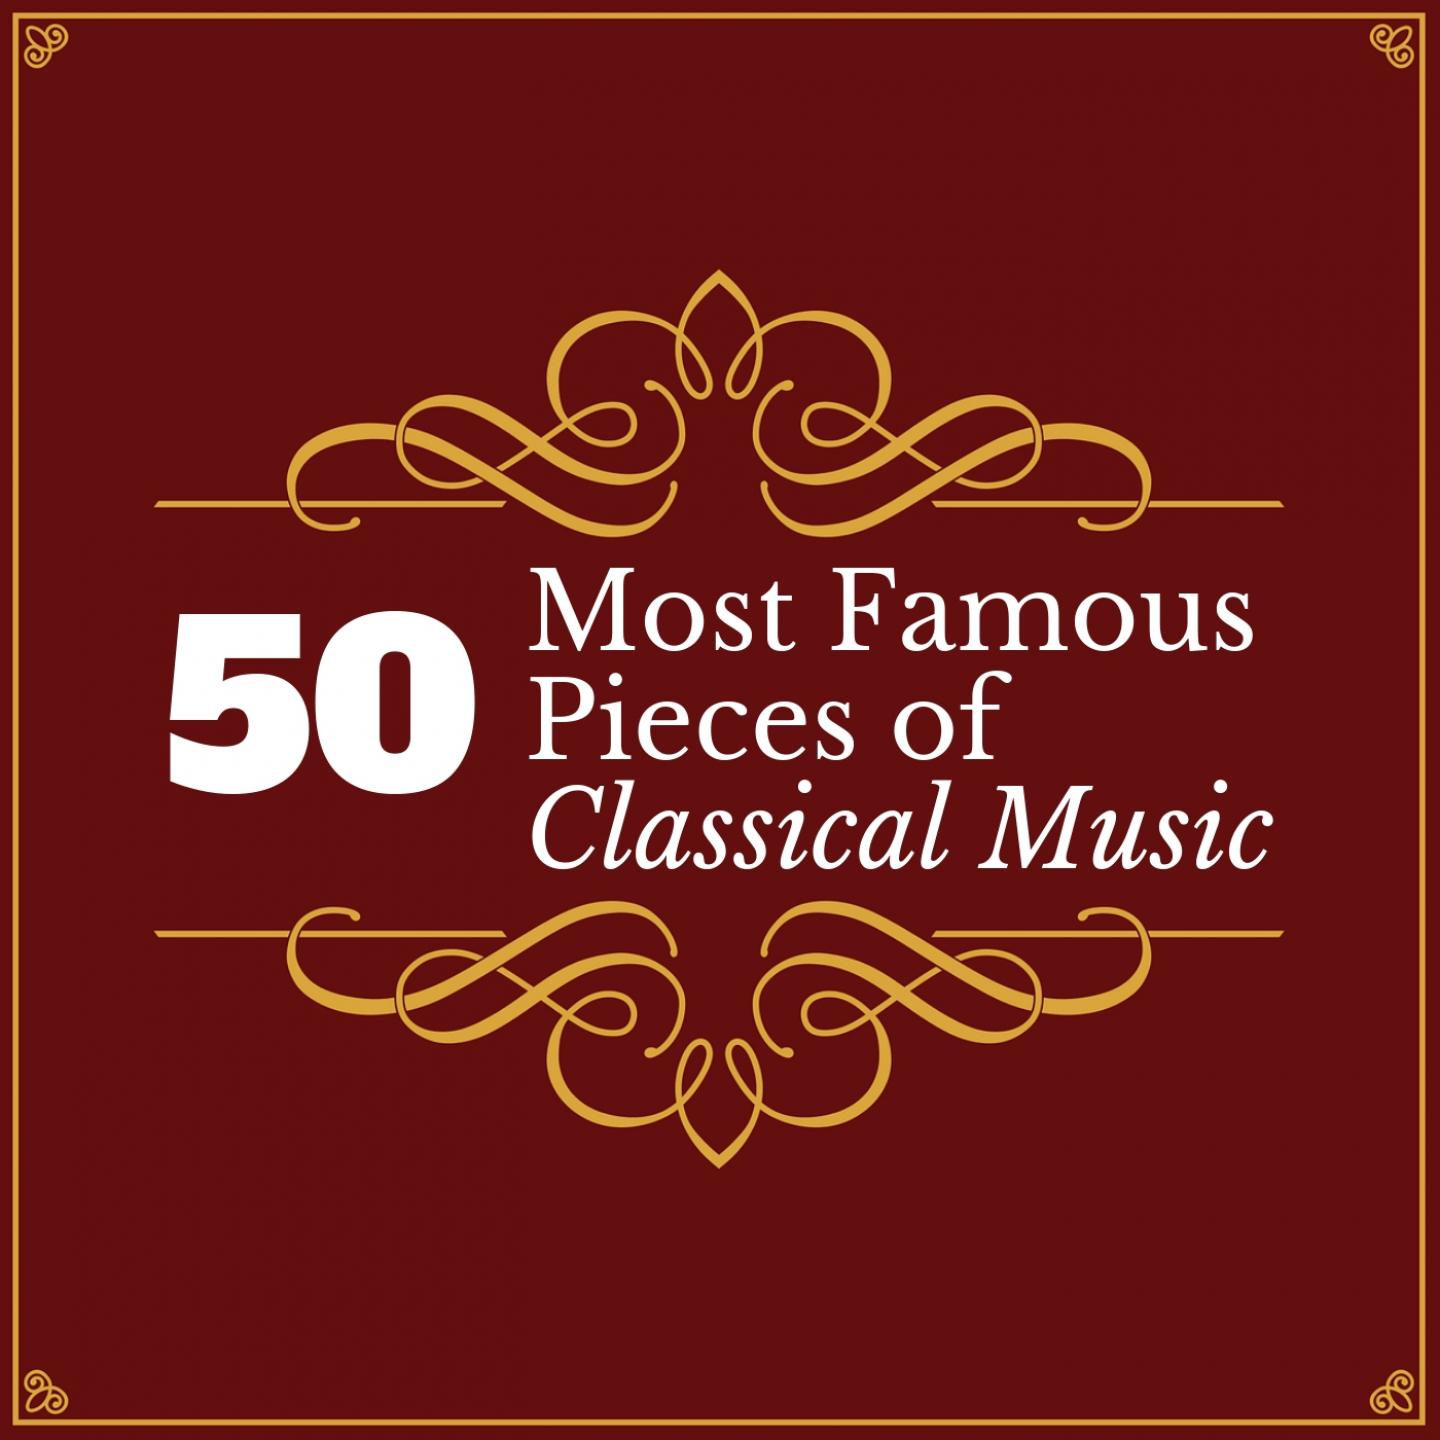 50 Most Famous Pieces of Classical Music